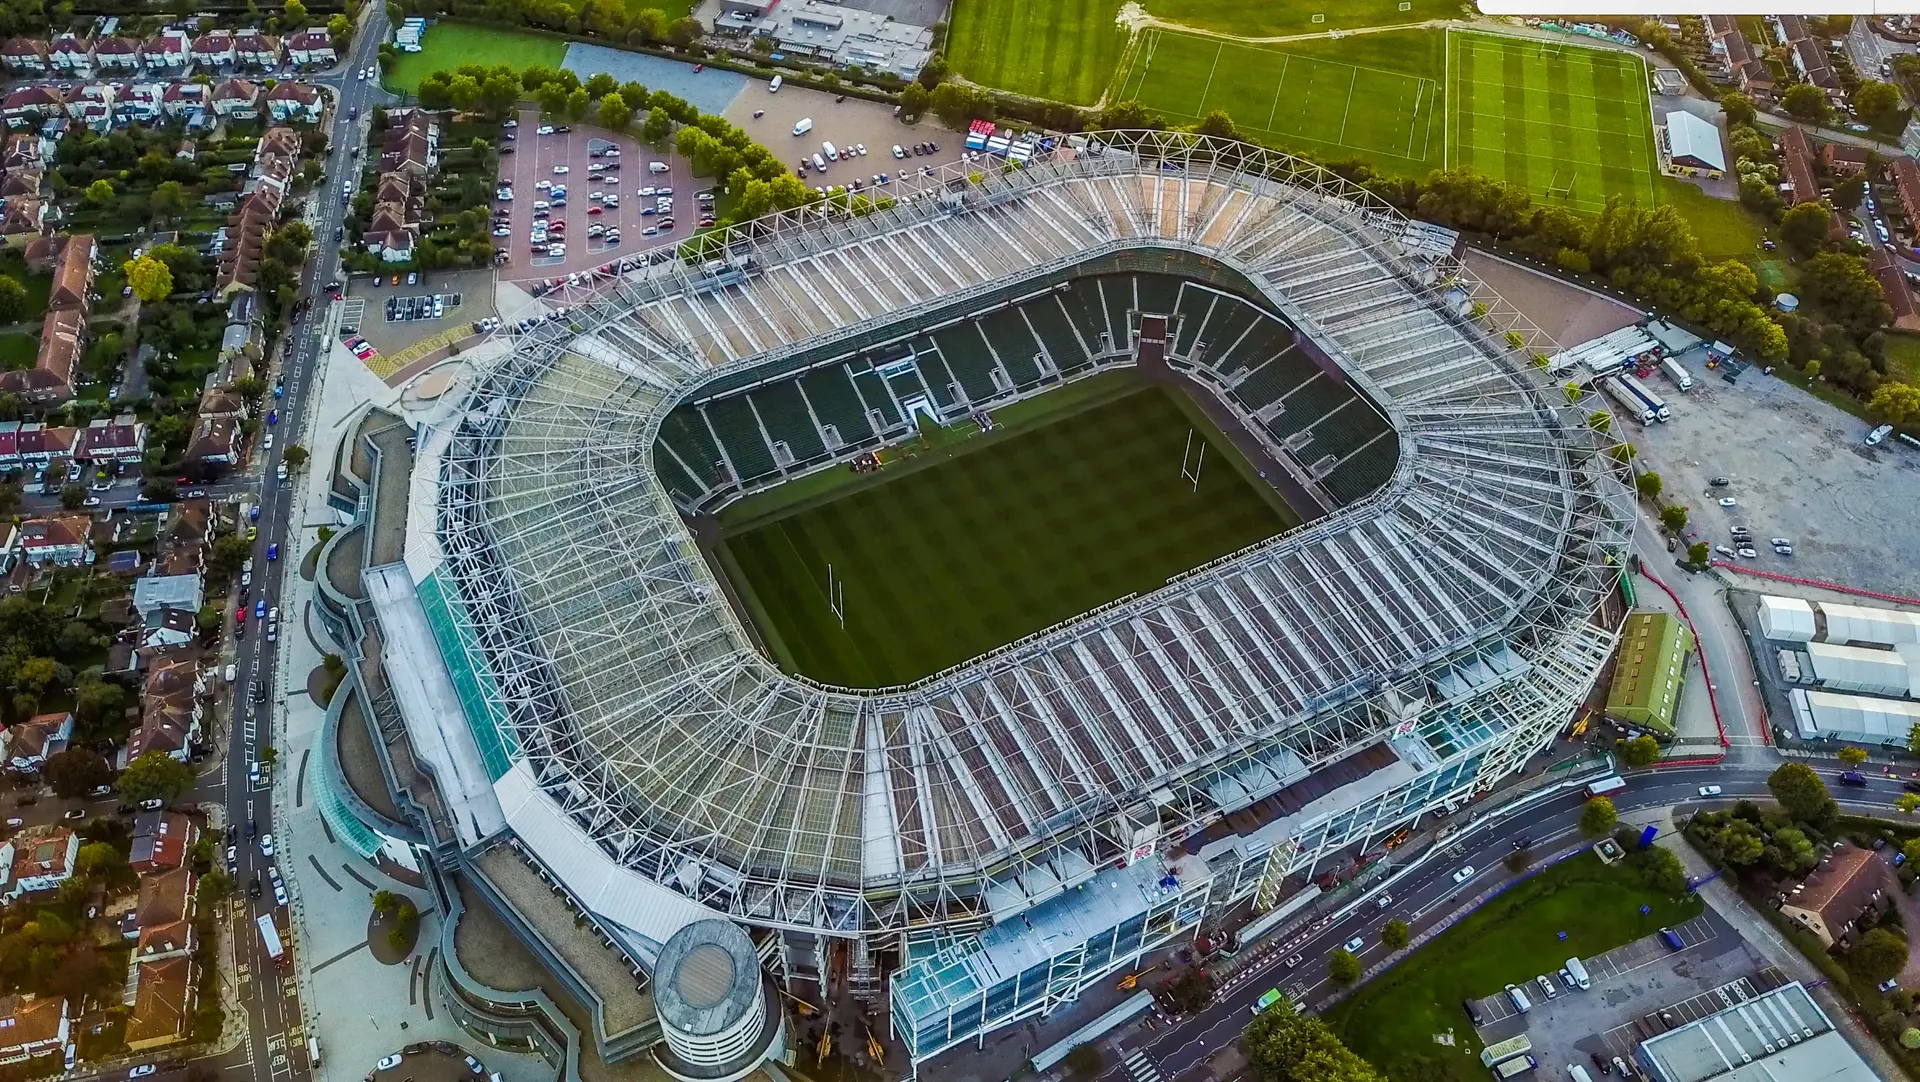 Twickenham is one of the top sporting venues in london